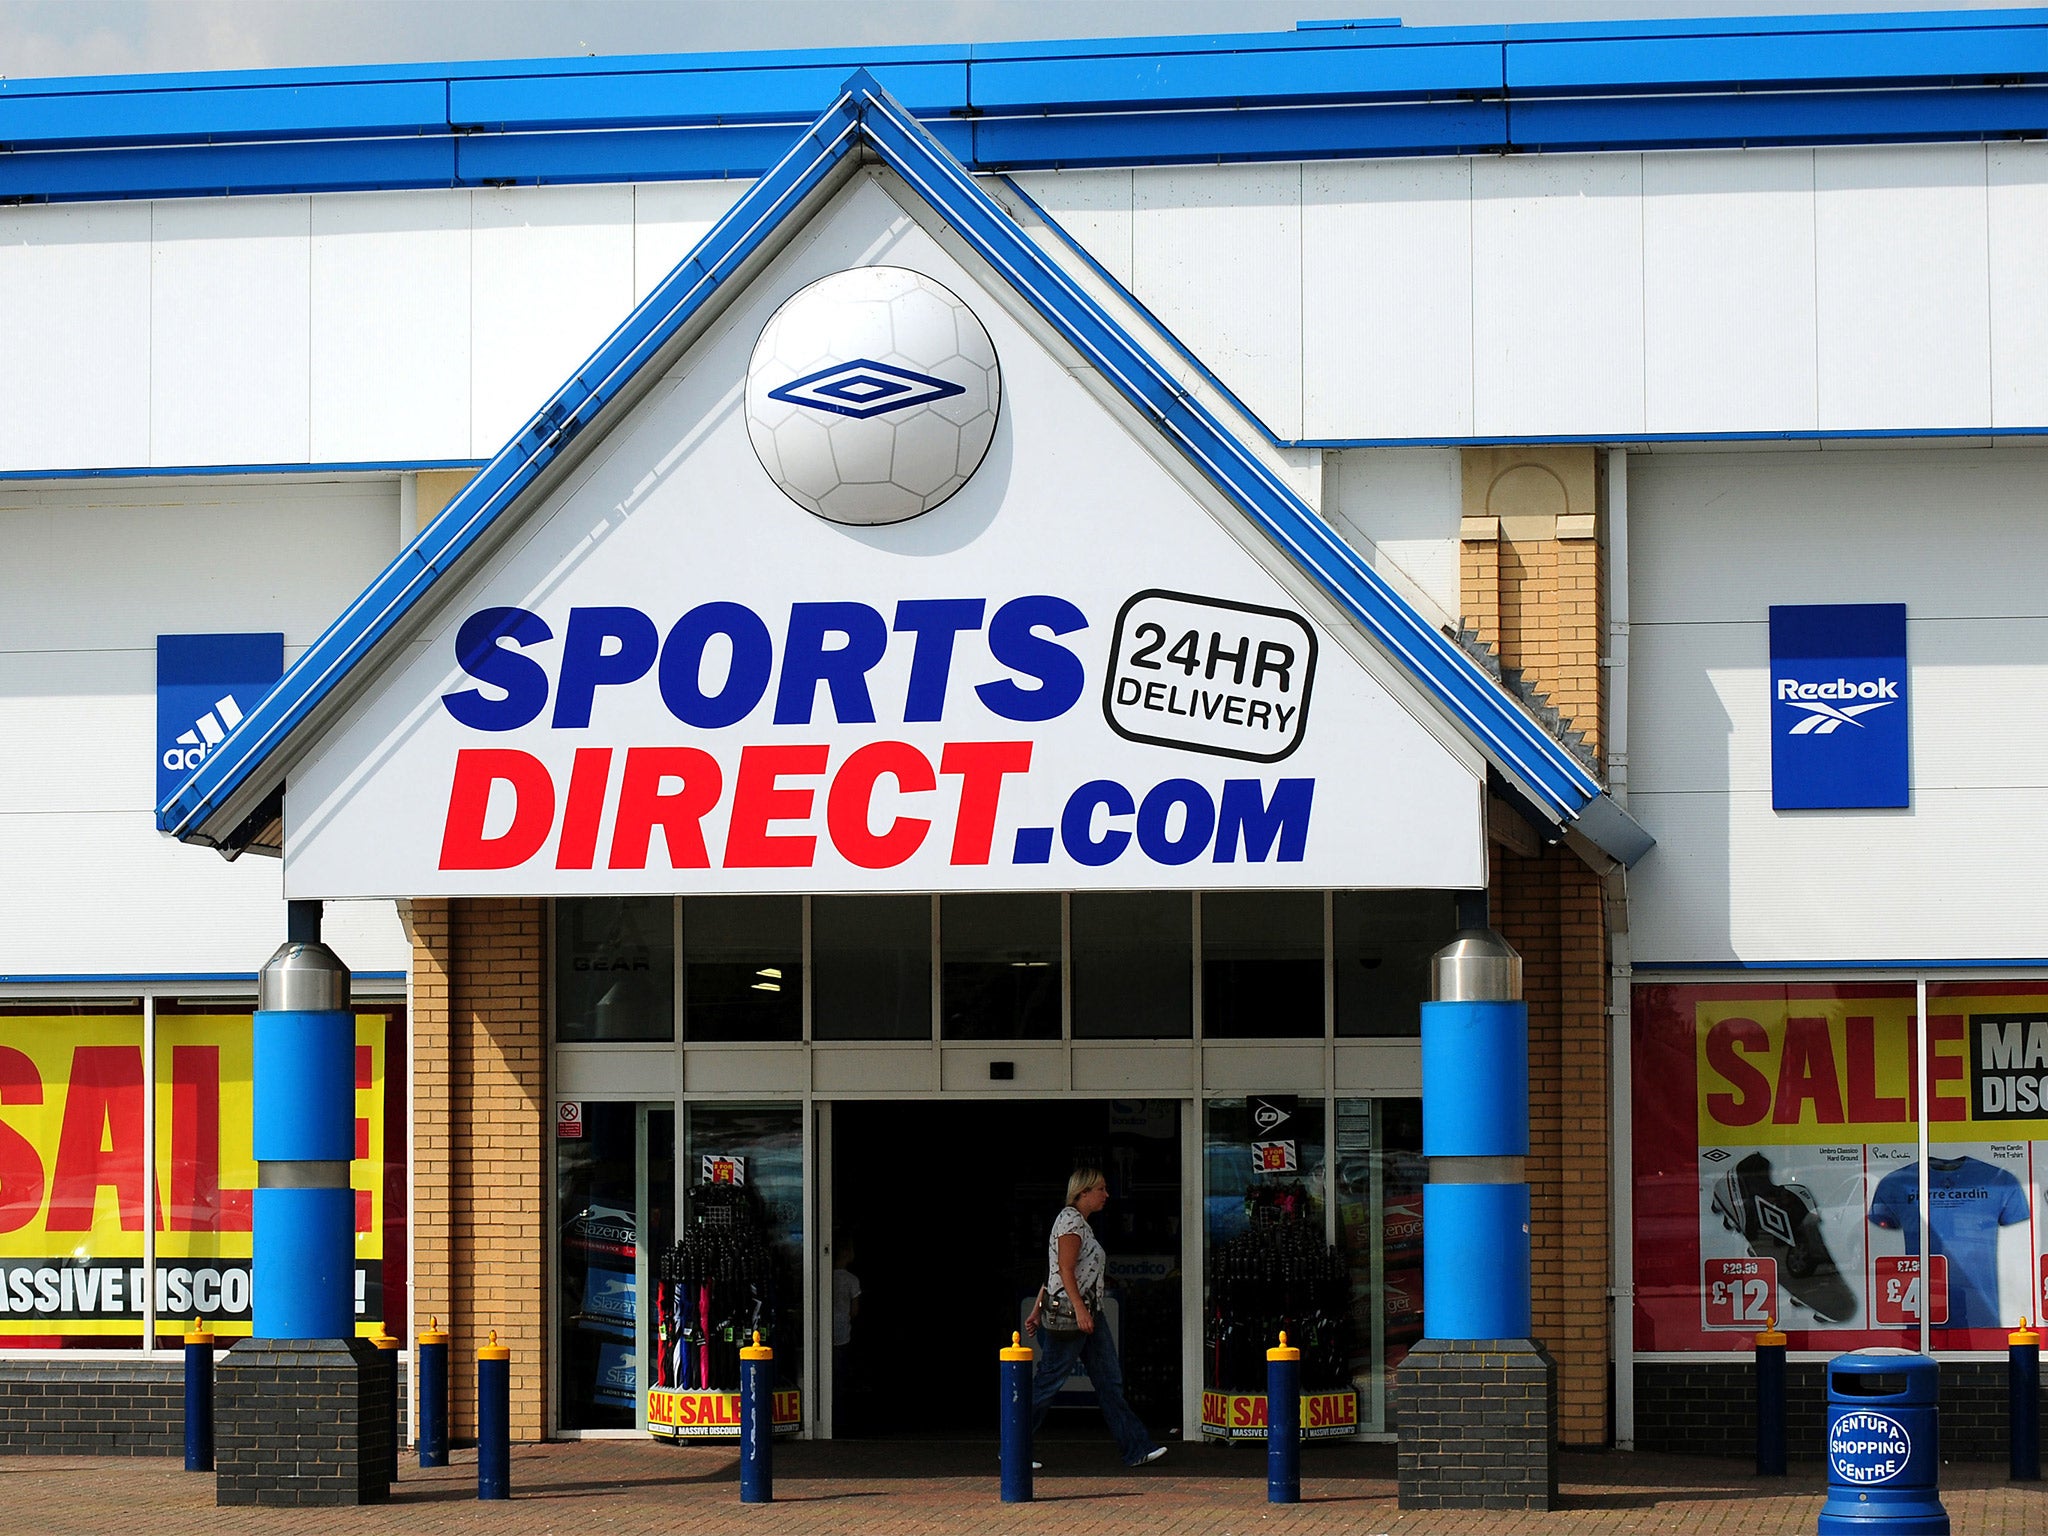 Sports Direct said the guard was employed through a security company and that he was fired shortly after the incident took place